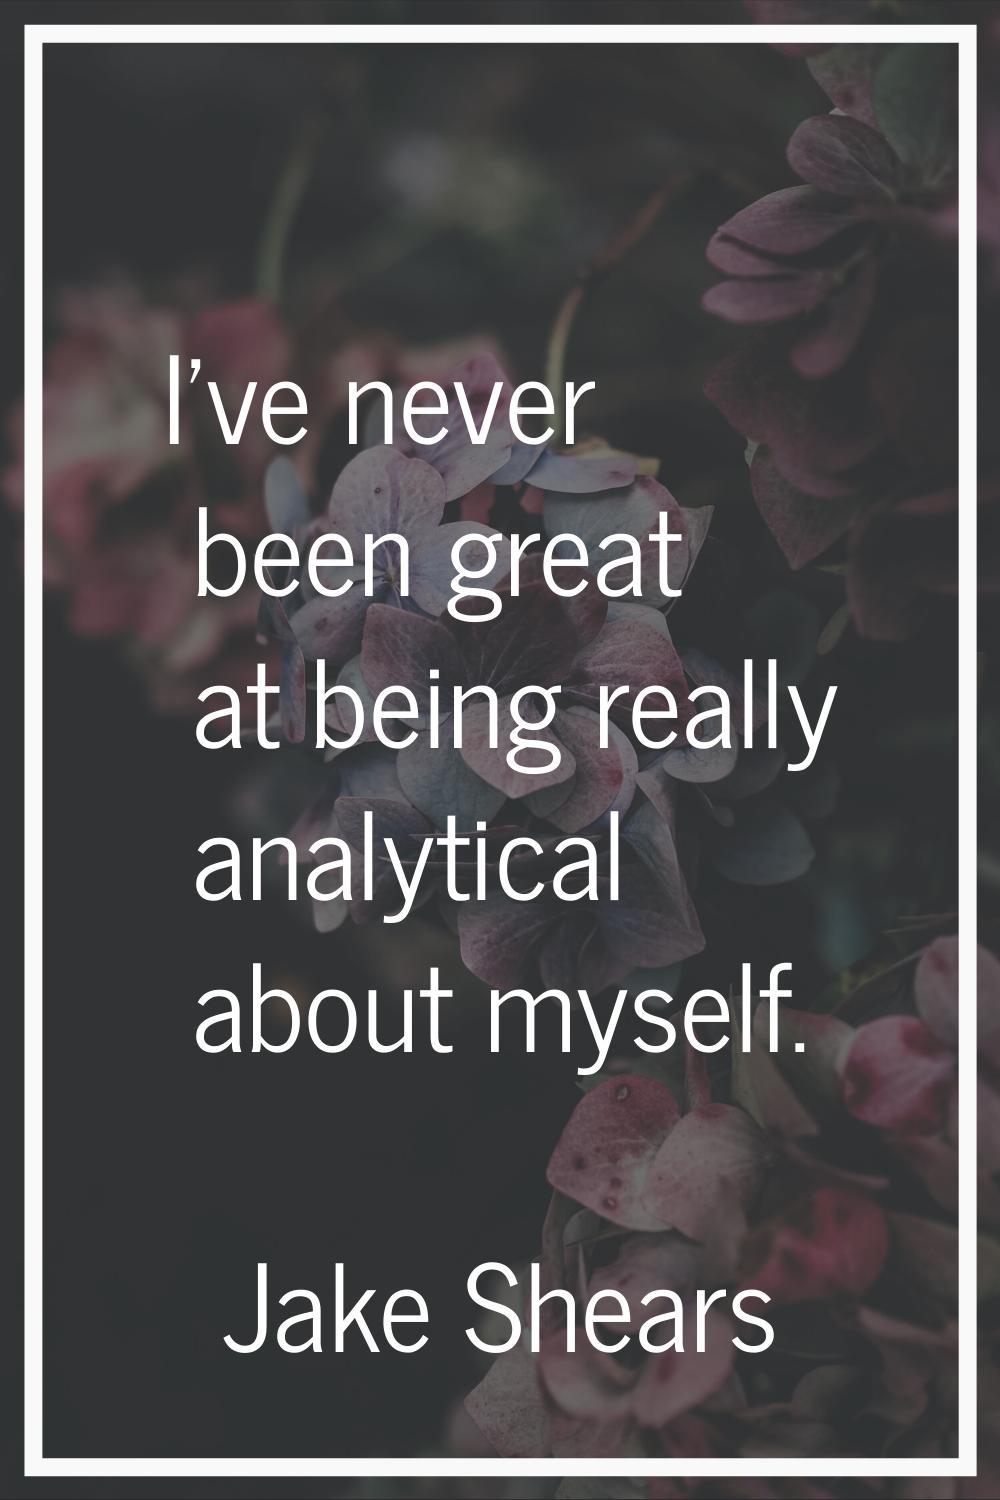 I've never been great at being really analytical about myself.